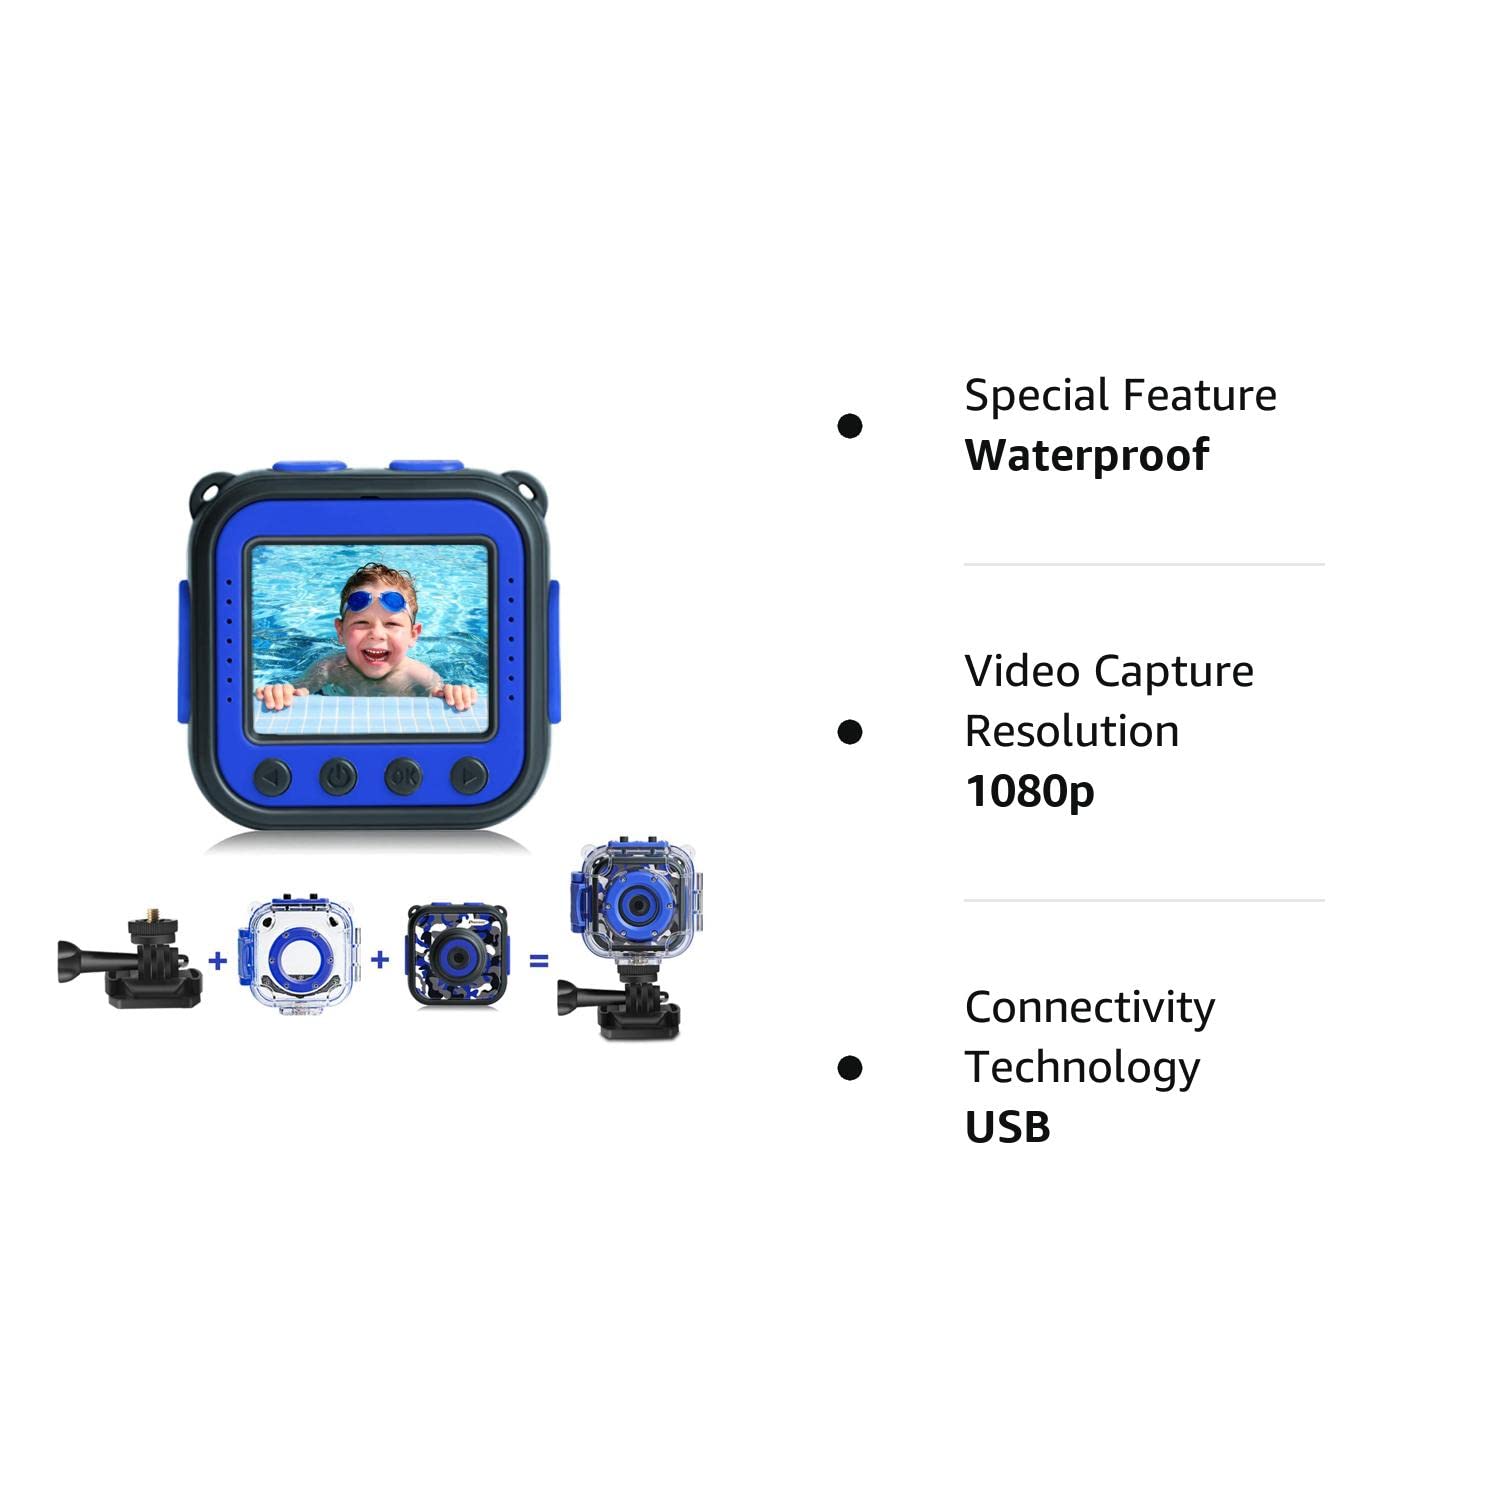 PROGRACE [Upgraded] Kids Waterproof Camera Action Video Digital Camera 1080 HD Camcorder for Boys Toys Gifts Build-in Game(Blue)